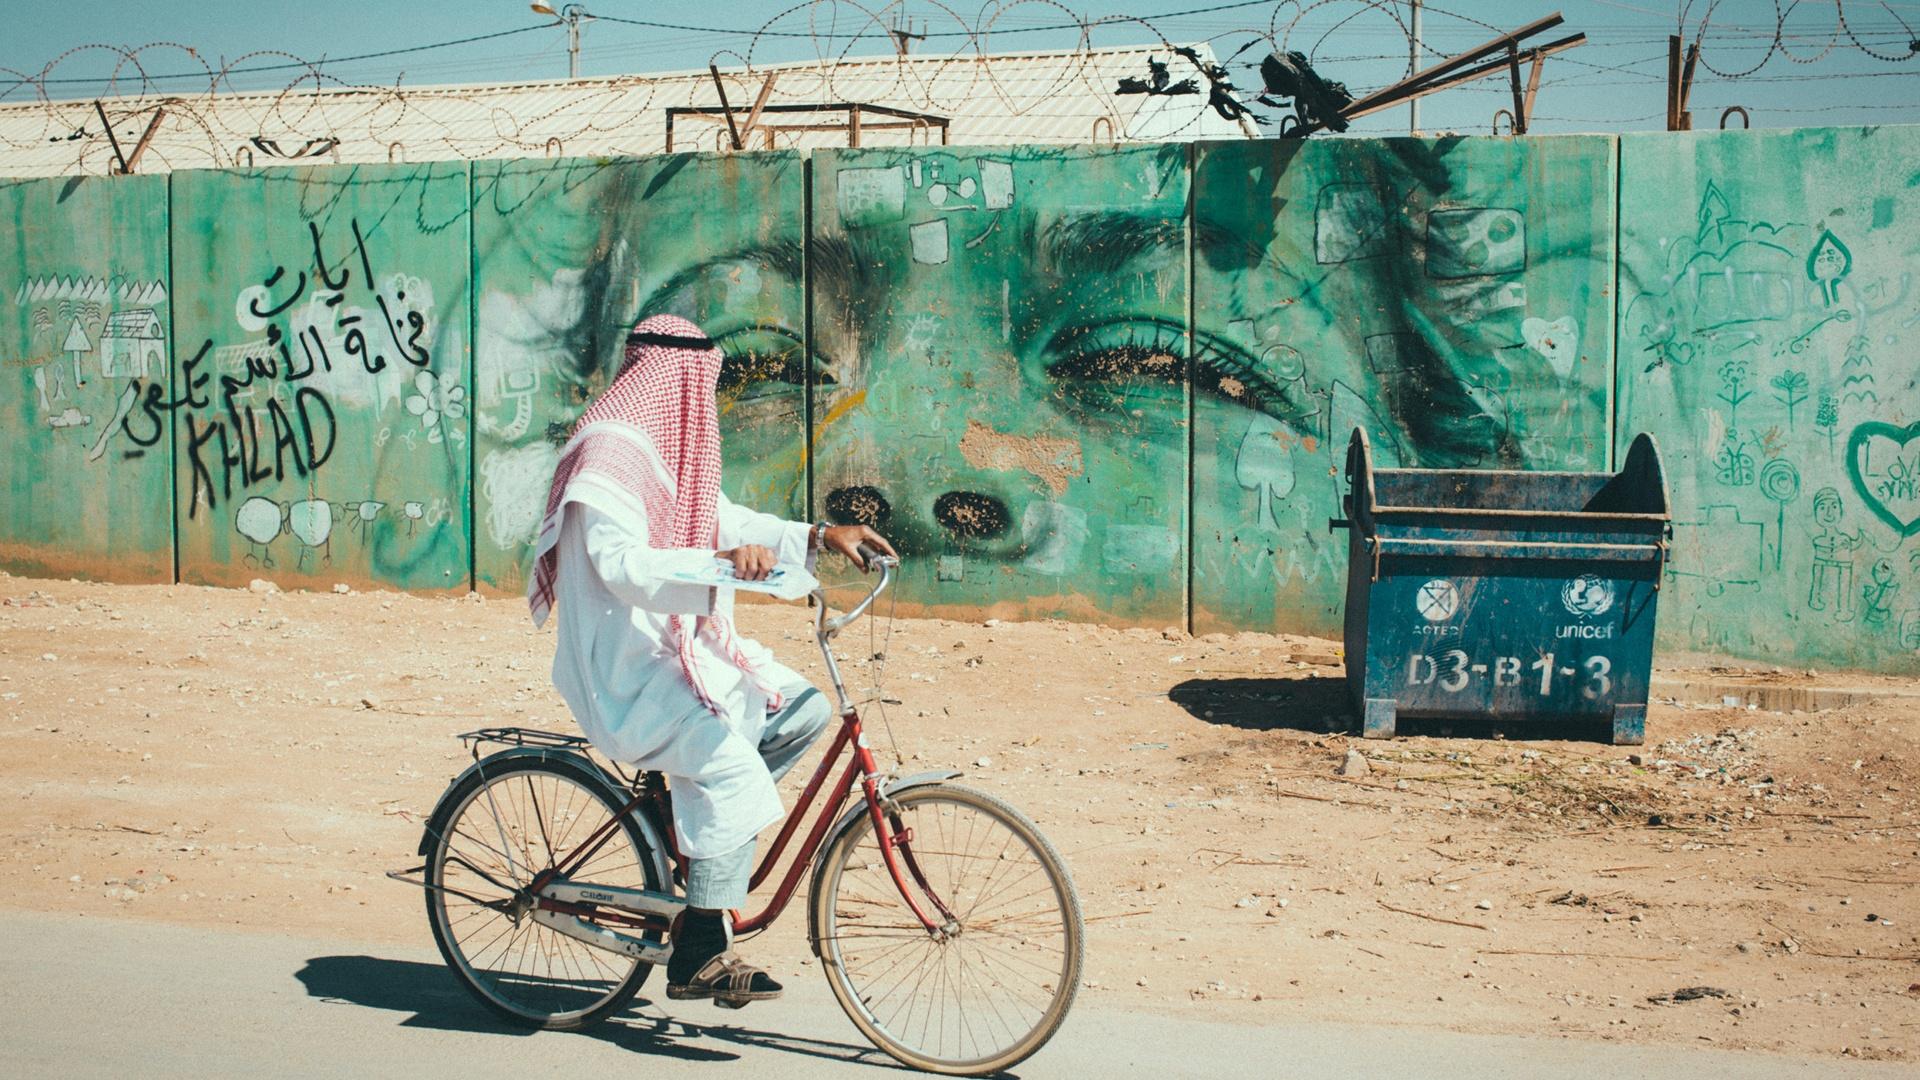 A cyclist, passes graffiti in Gaza, Palestinian Territory. In Gaza, the aquifer is overdrawn and water has been scarce for decades.